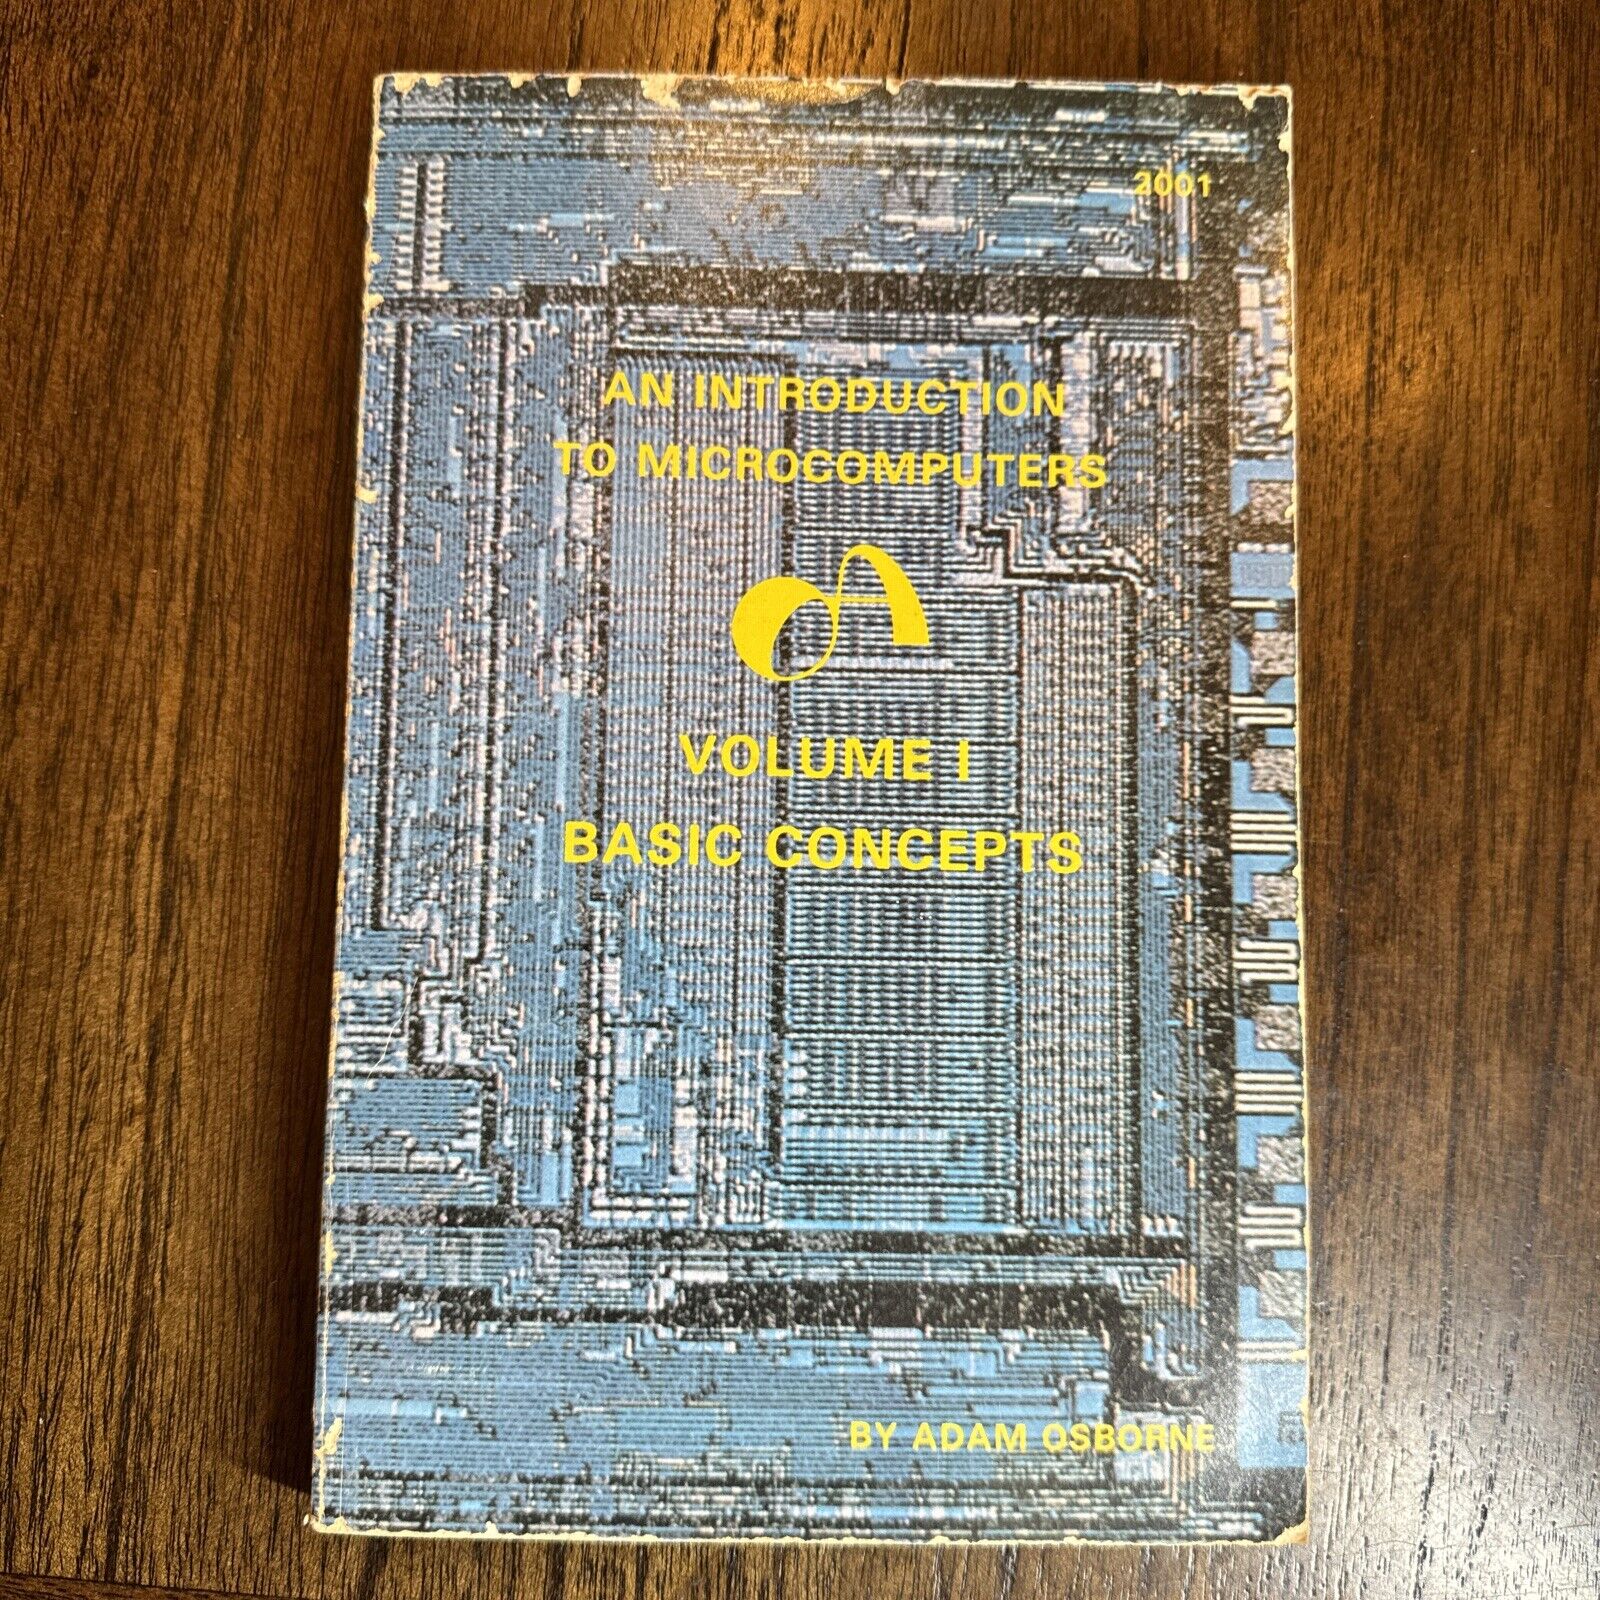 1976 An Introduction To Microcomputers - Adam Osborne Volume 1 Basic Concepts